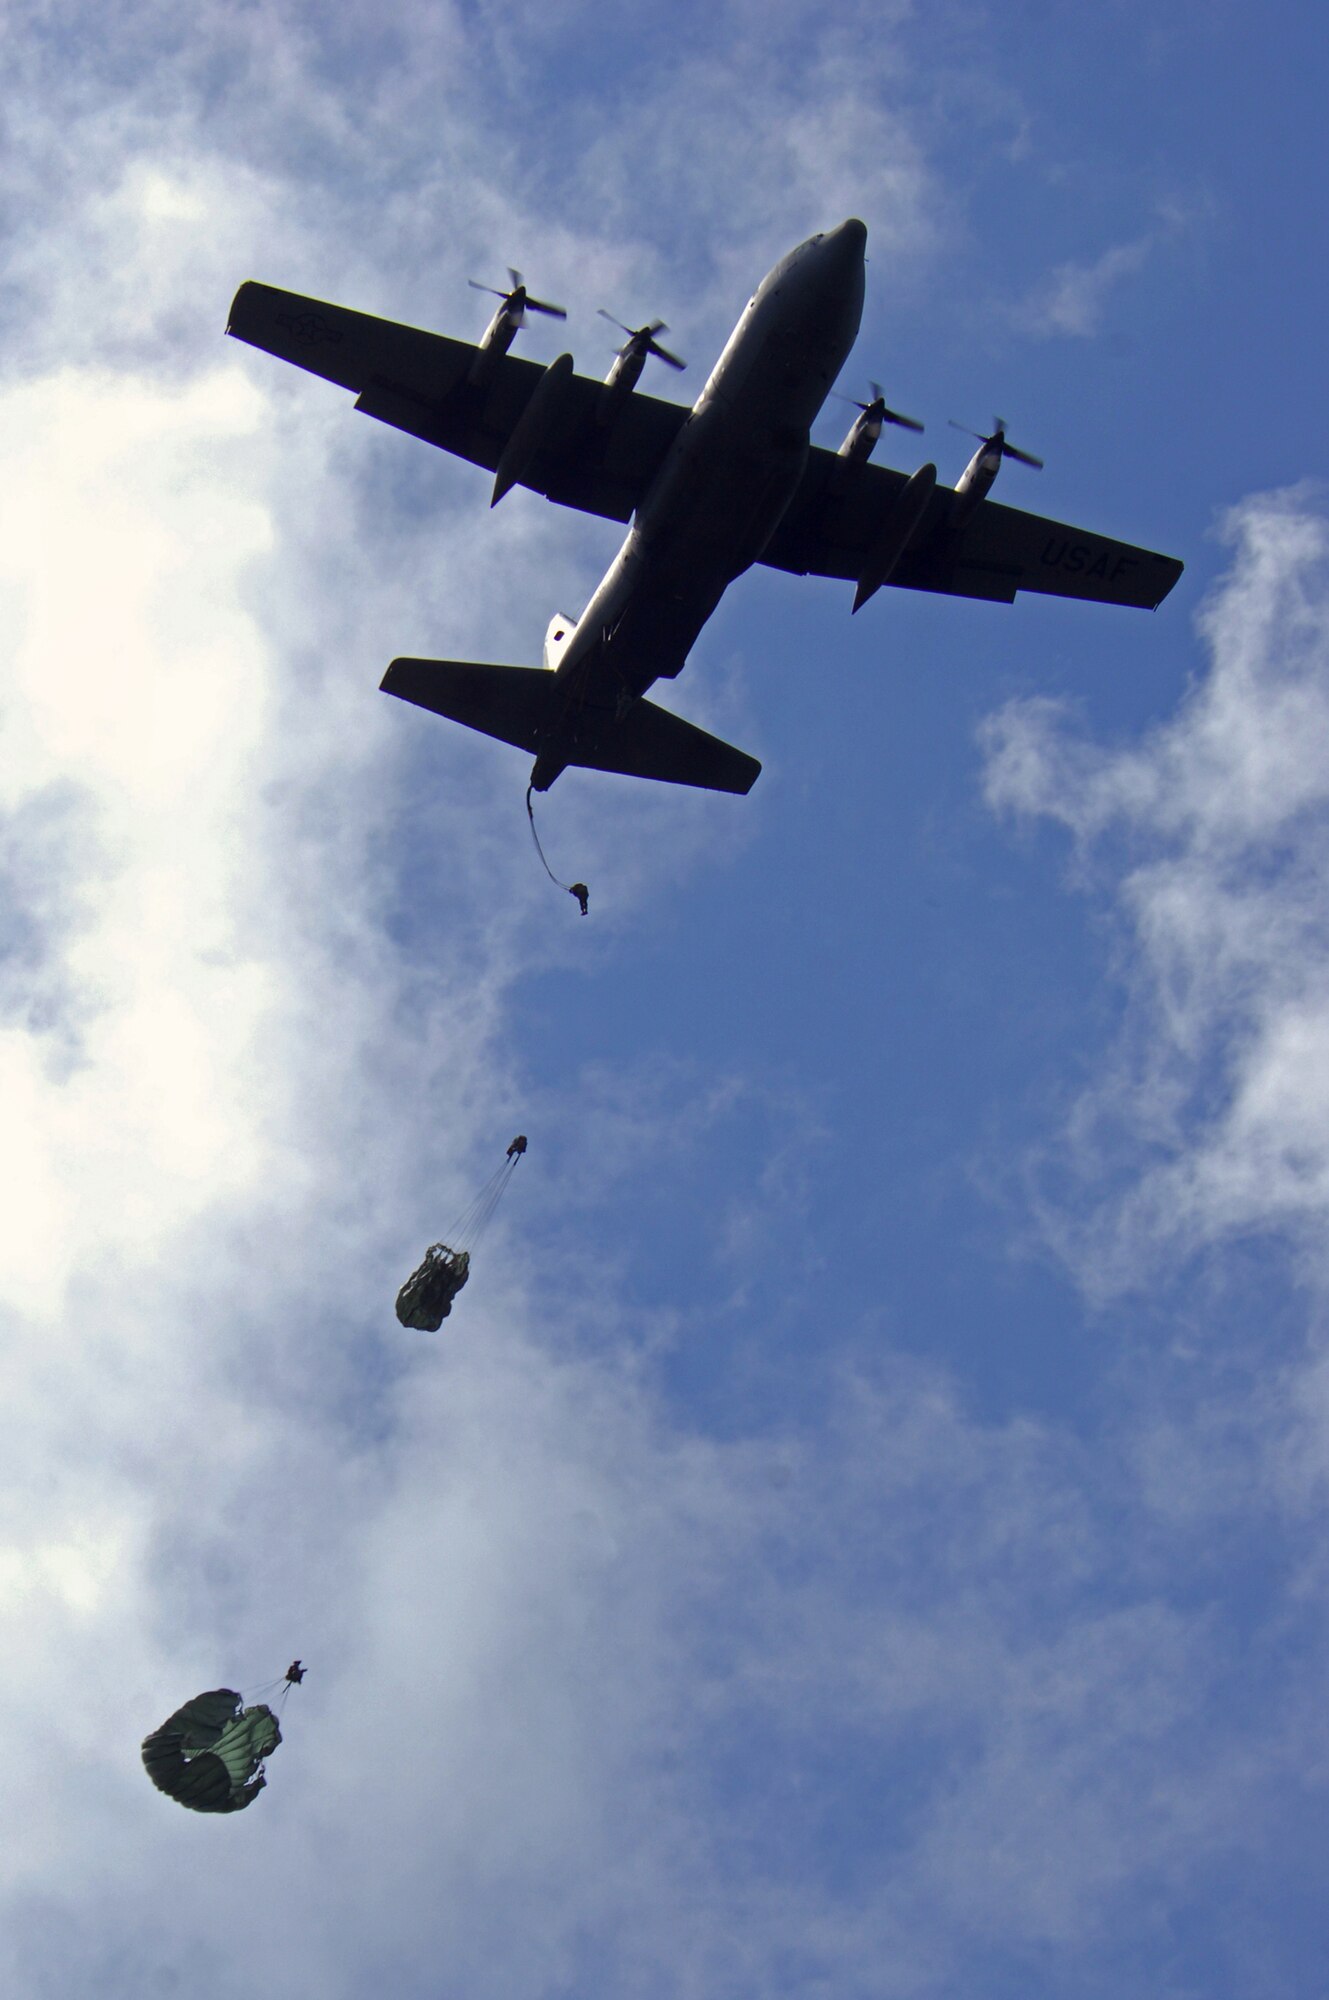 United States Air Force paratroopers with the 86th Contingency Response Group jump from a C-130 Hercules as a part of an airfield assessment team during an Operational Readiness Exercise, May 20, 2009, West Freugh Airfield, Scotland. (U.S. Air Force photo by Senior Airman Kenny Holston)